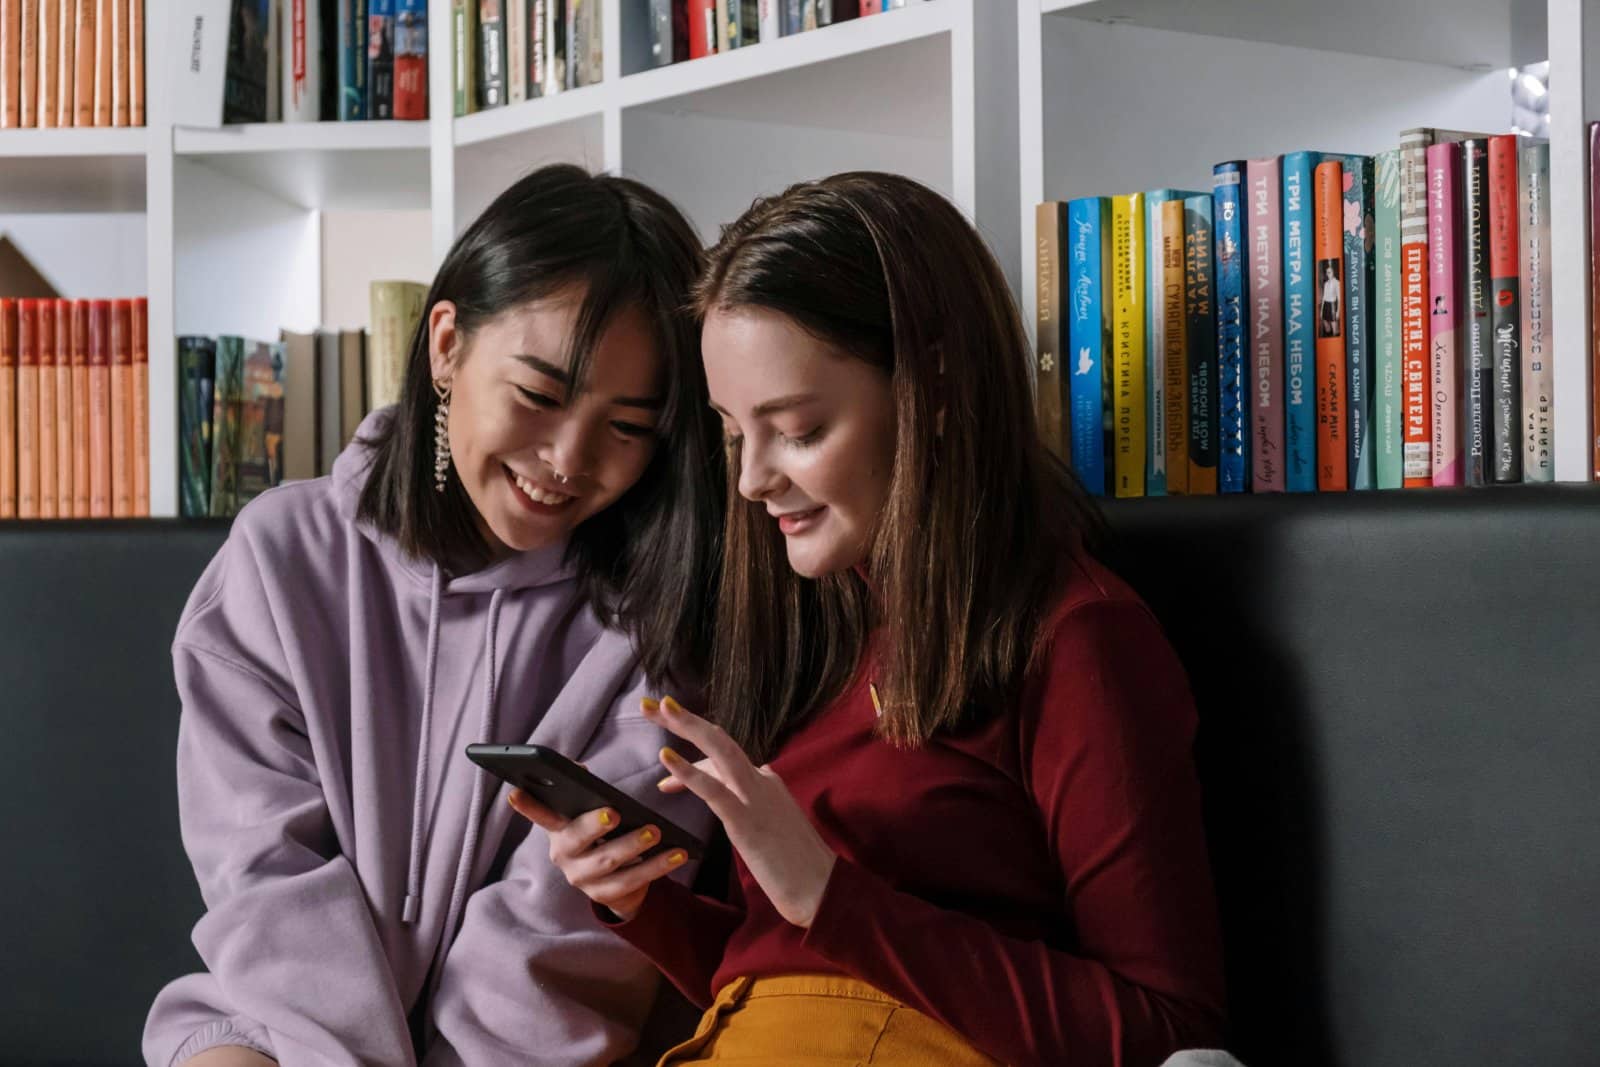 Image Credit: Pexels / cottonbro studio <p>At 18, Tiffany Zhong founded Zebra IQ, a platform that provides insights into Gen Z trends and behaviors. Her ability to identify and capitalize on market gaps has made her a sought-after expert in understanding the next wave of consumers.</p>